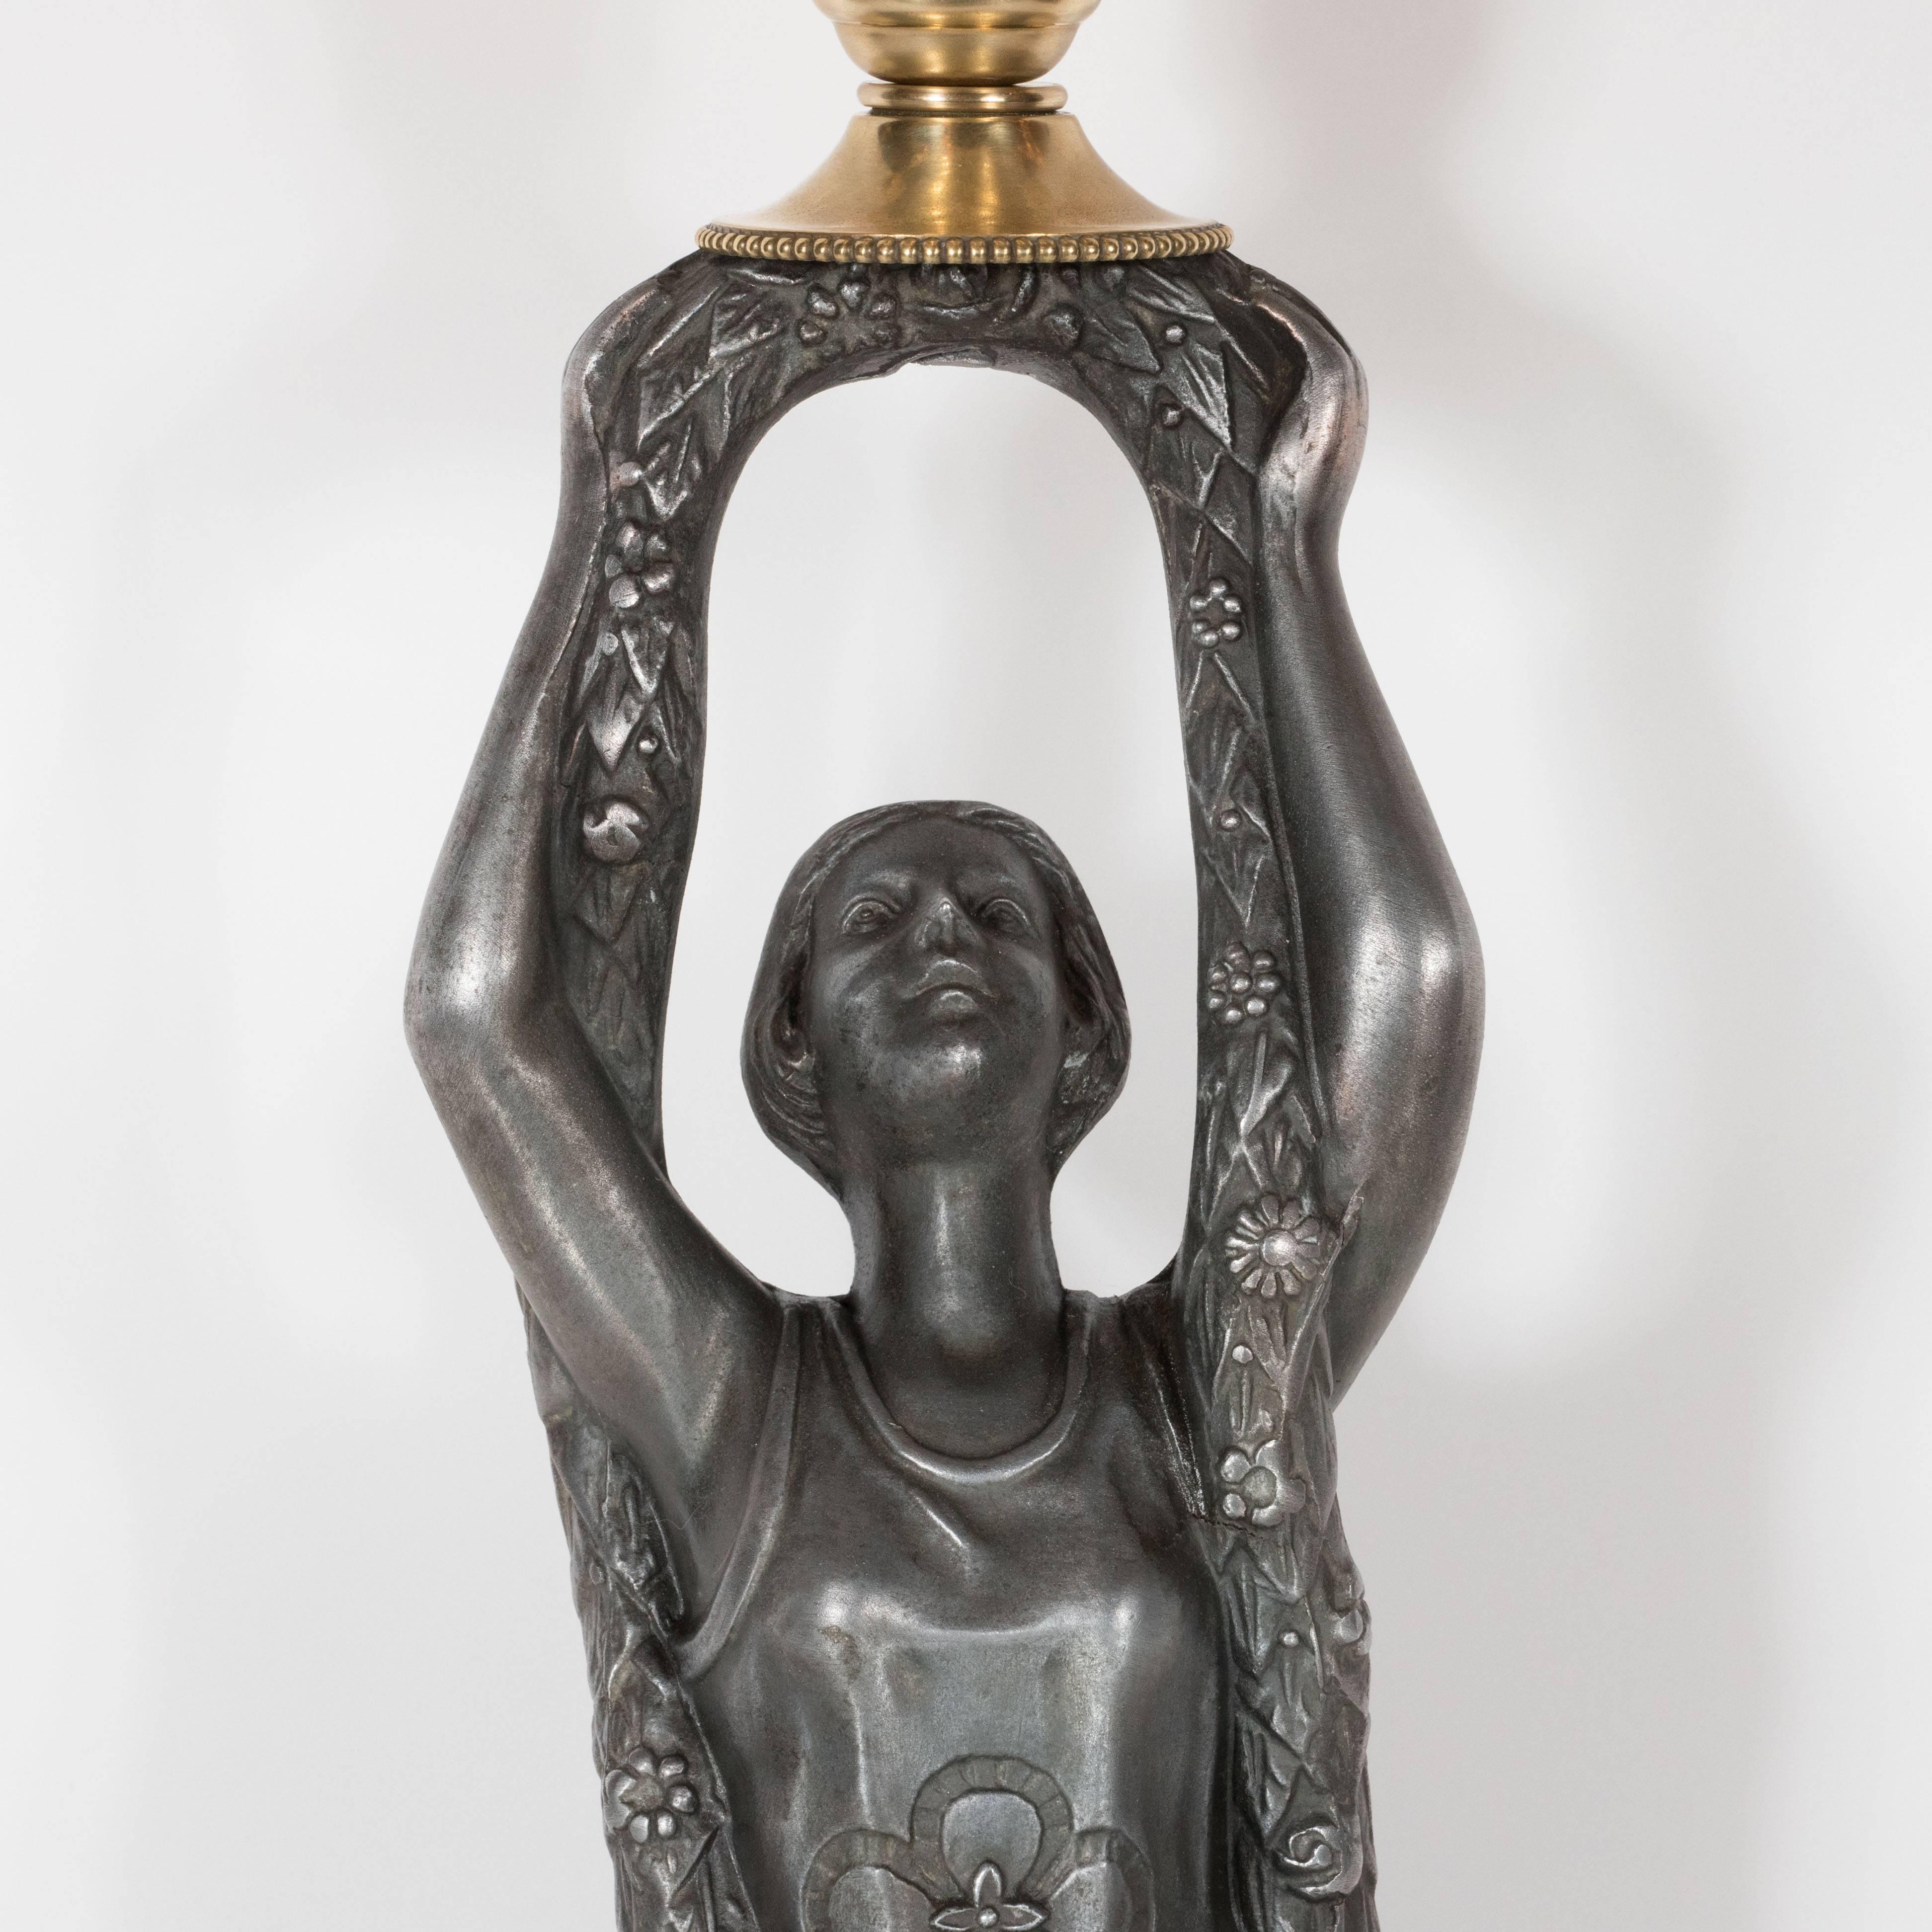 This rare and original Art Deco flapper lamp was realized in the United States, circa 1930. In the center of the piece, a lady in a 1930s style dress- inscribed with a floral decoration- kneels on a beveled base with a geometric cubist patterned